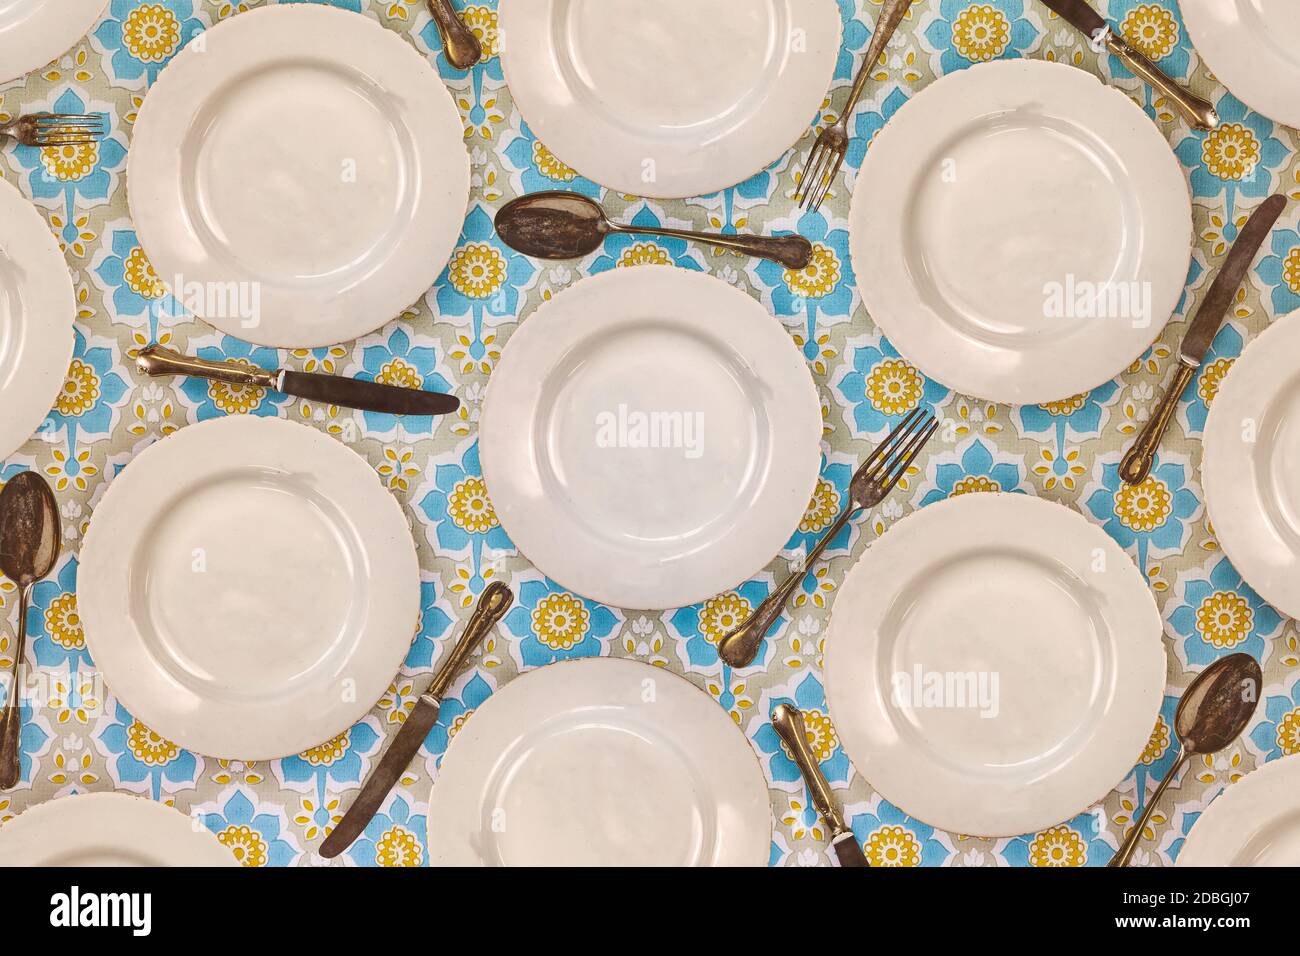 Pattern of vintage dinner plates, knives, forks and spoons on a flower cloth Stock Photo